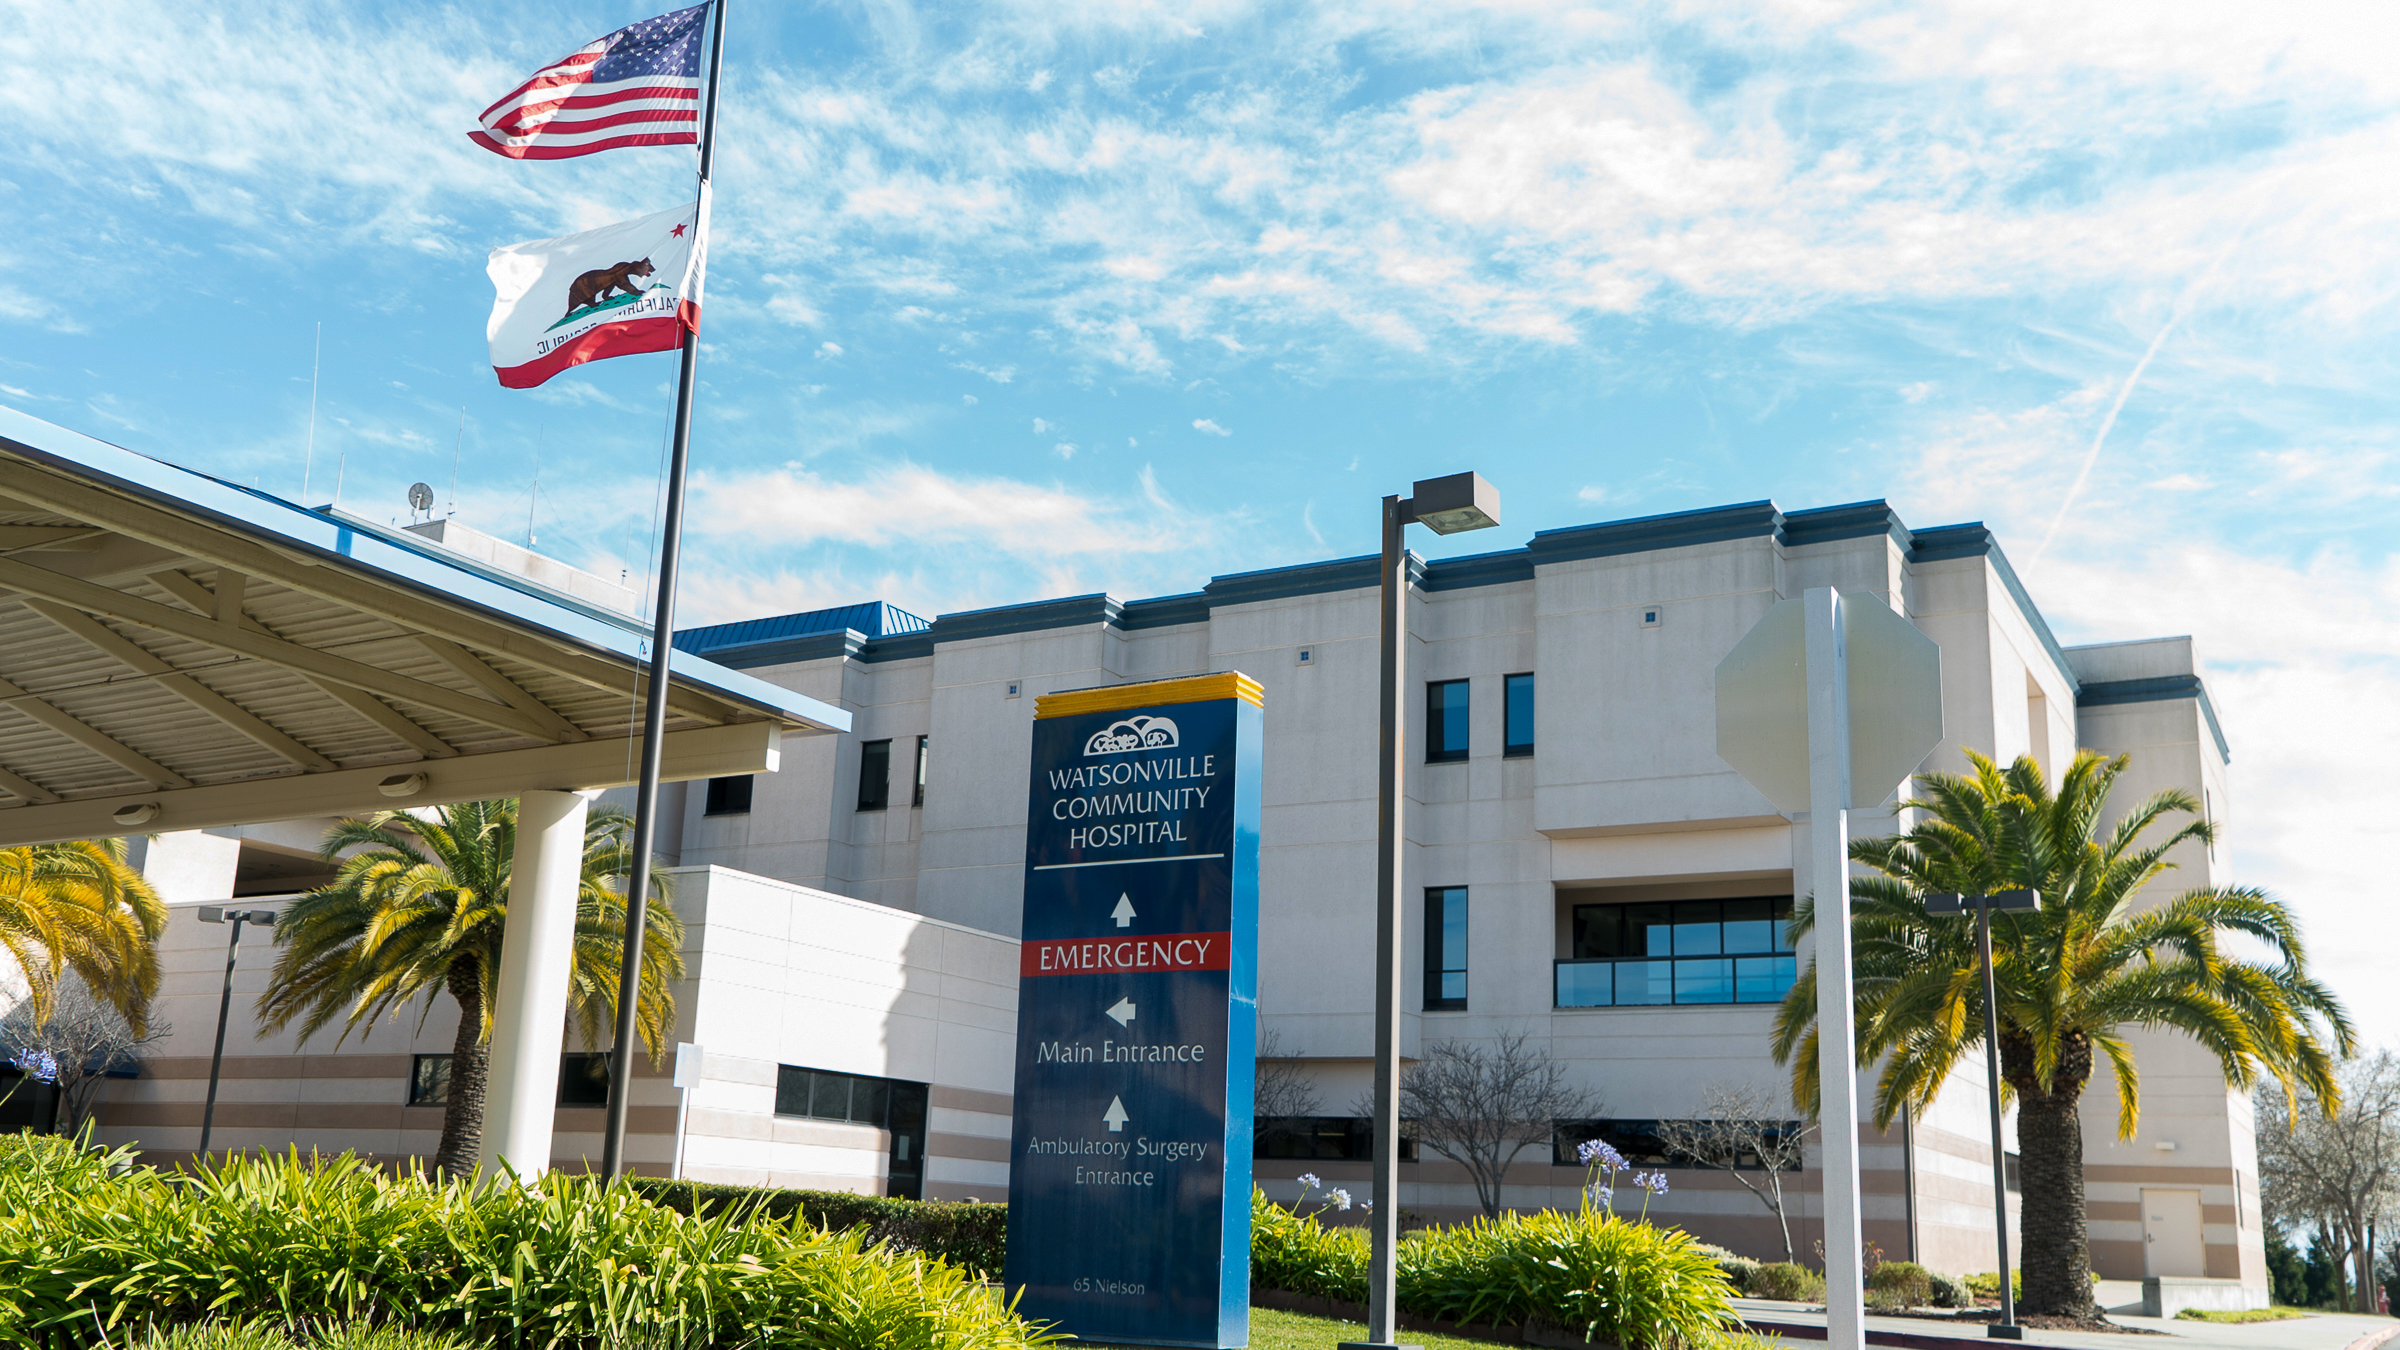 The Watsonville Community Hospital with a blue sky and a flag pole in front with the U.S. and California state flags.